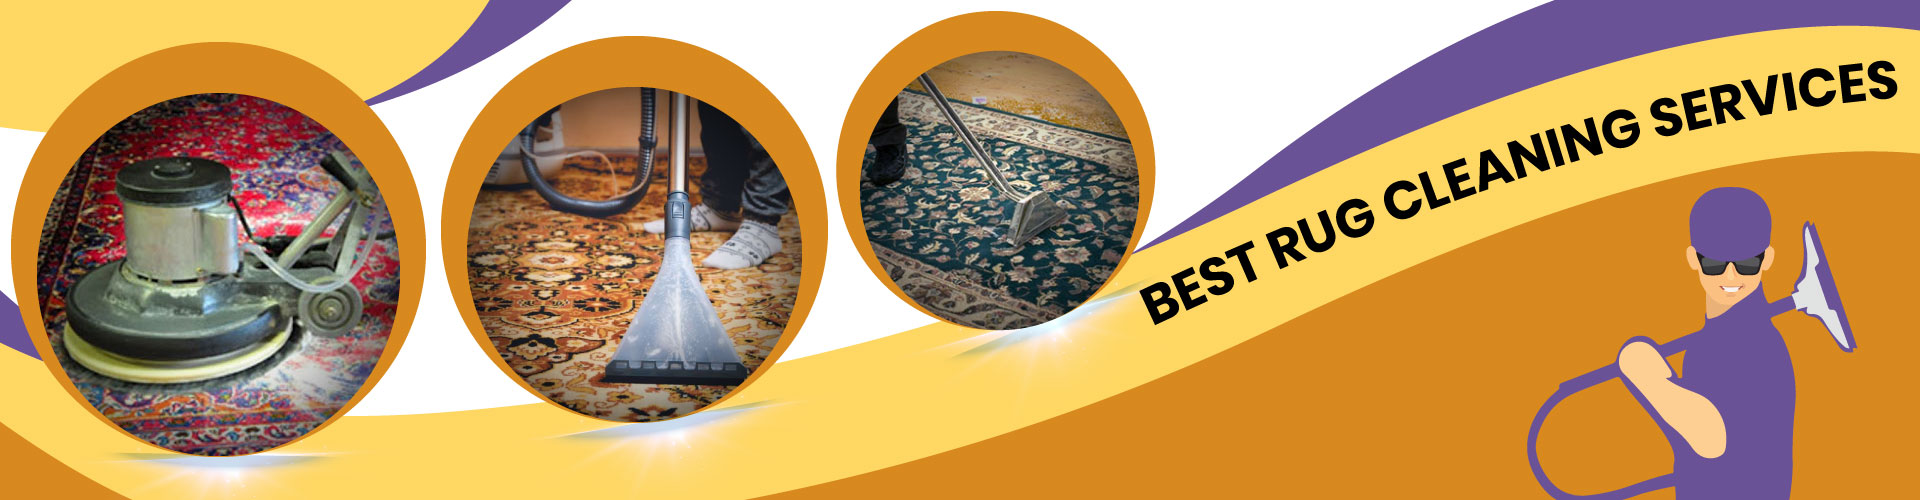 Rug cleaning Service